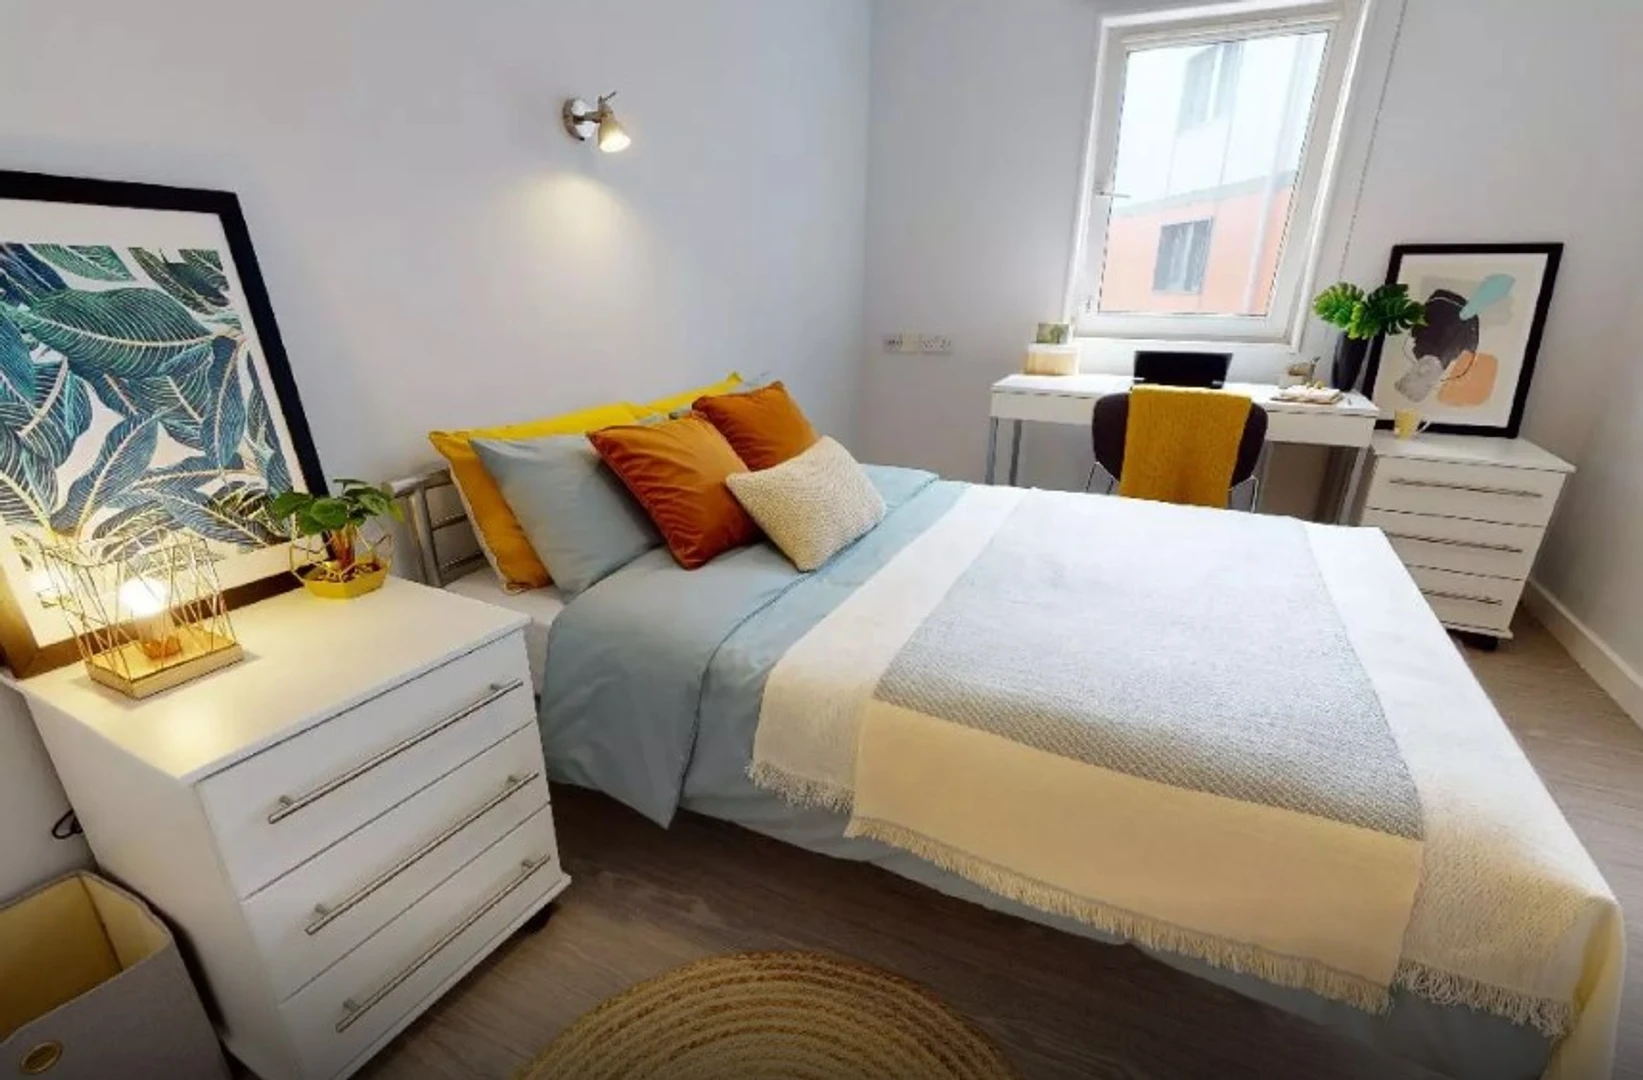 Accommodation in the centre of Manchester